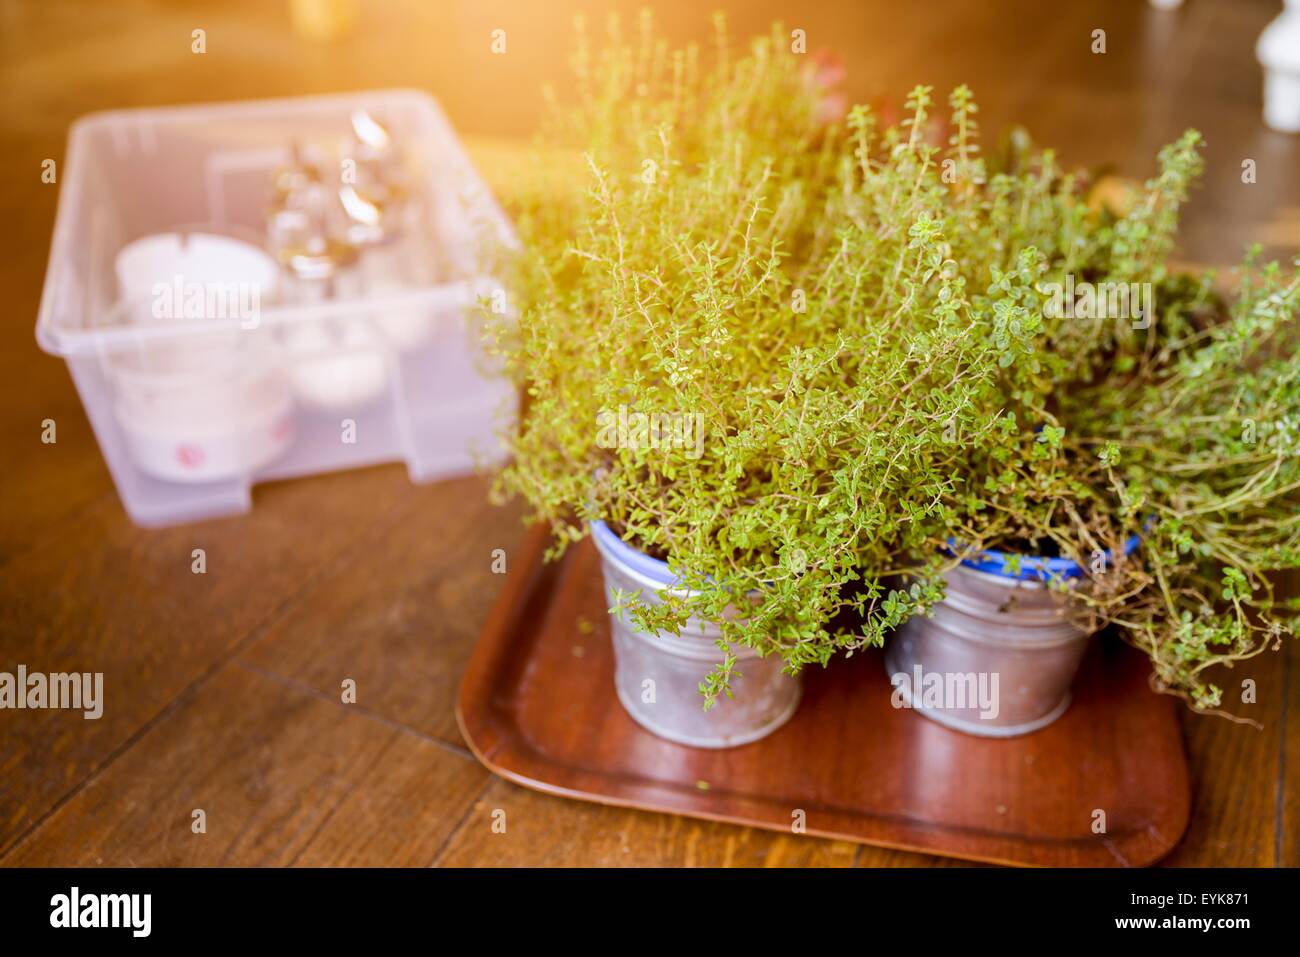 Pots of herbs, on tray, on table, close-up Stock Photo